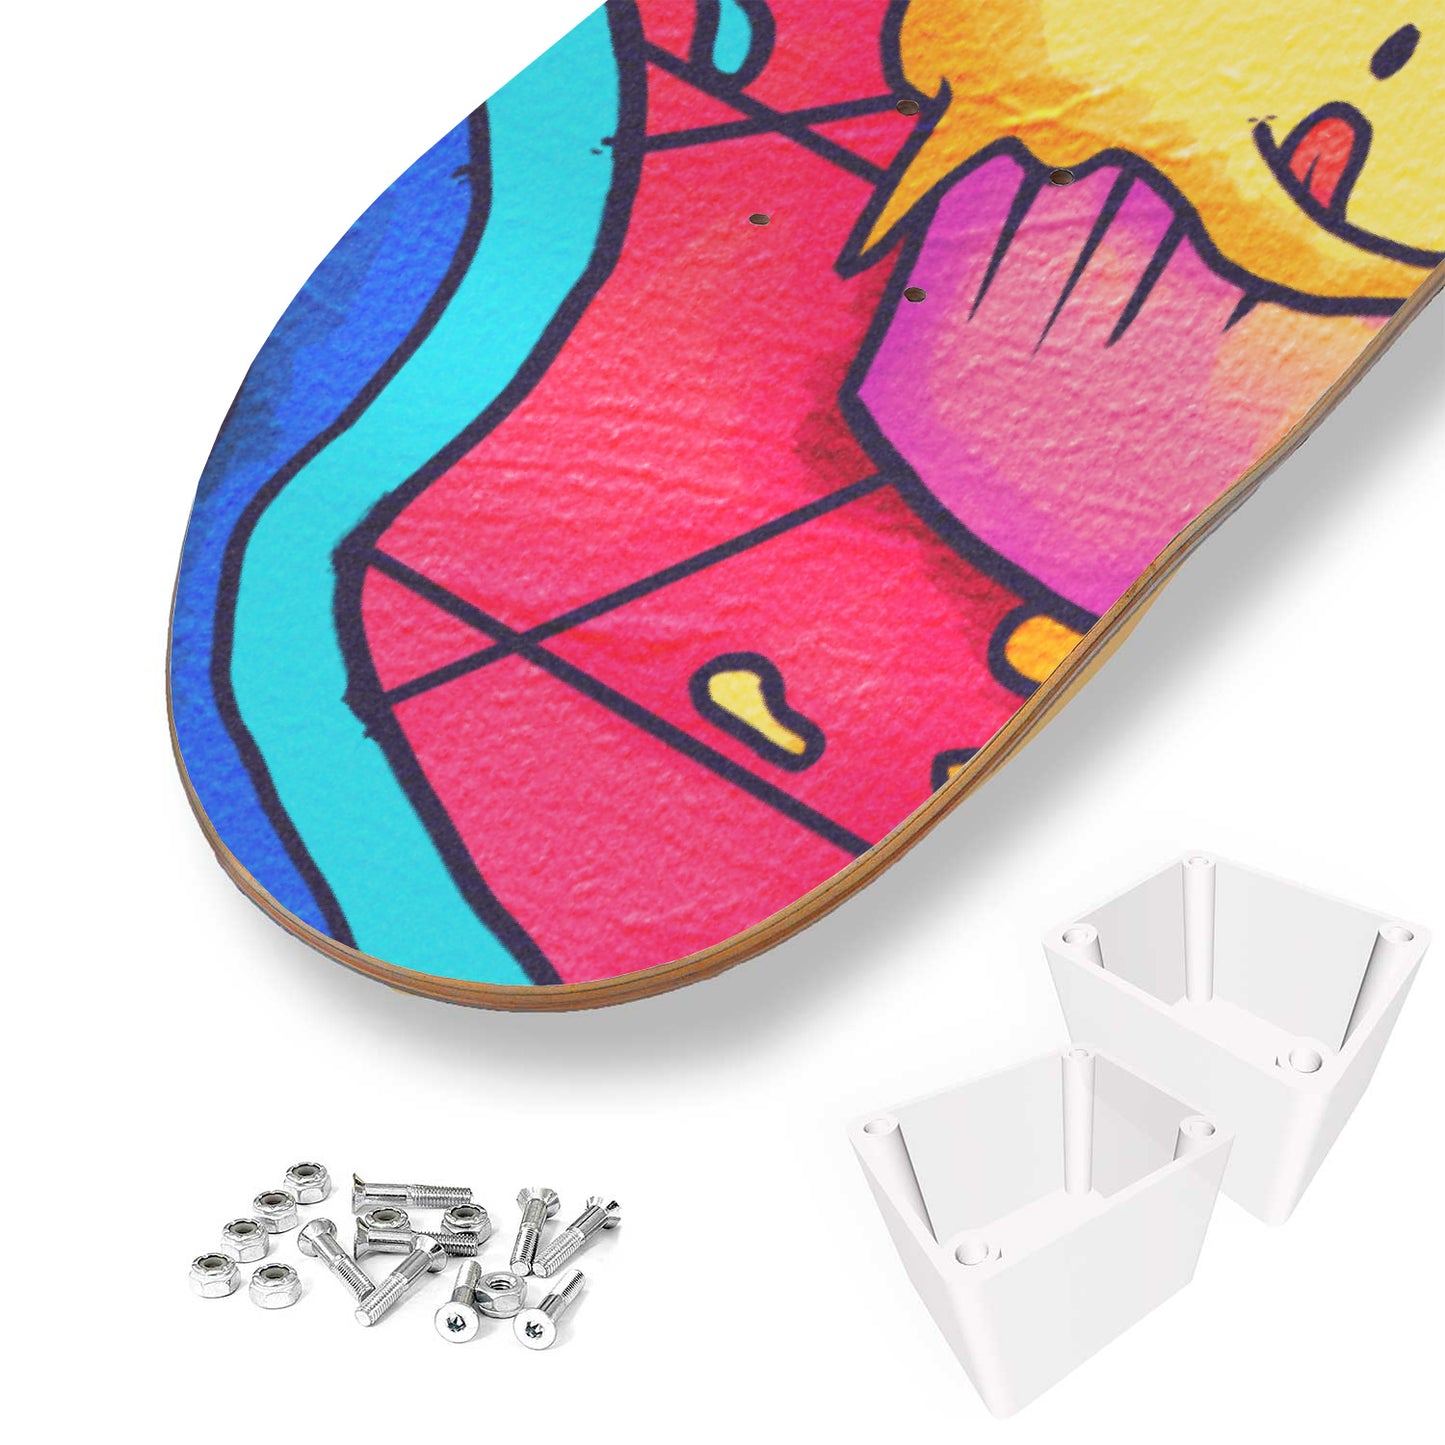 Yums and Sweet Doodle - 3 Piece Skateboard Wall Art